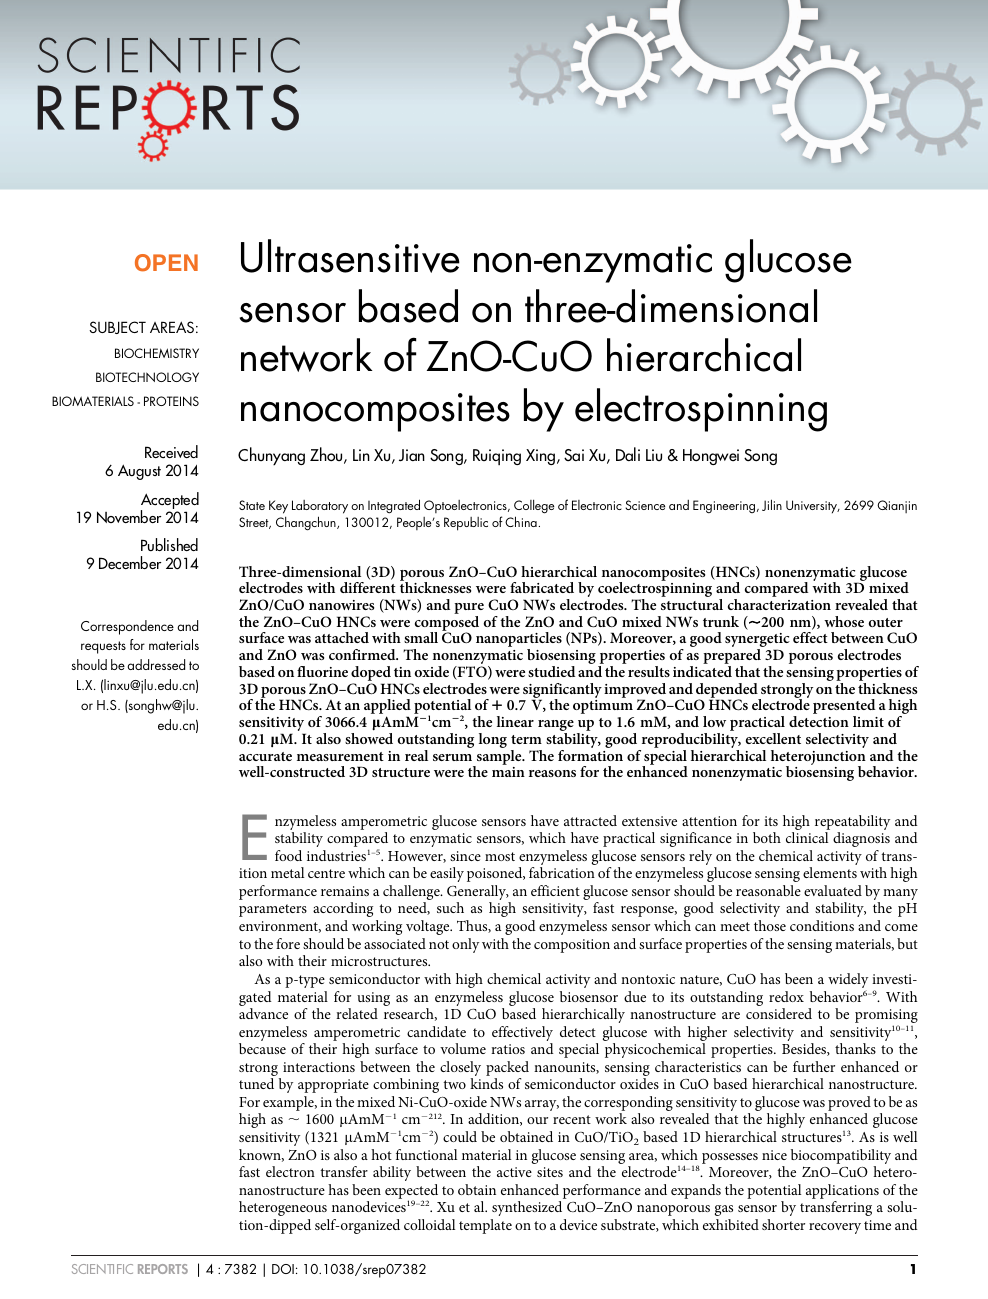 Ultrasensitive Non Enzymatic Glucose Sensor Based On Three Dimensional Network Of Zno Cuo Hierarchical Nanocomposites By Electrospinning Topic Of Research Paper In Nano Technology Download Scholarly Article Pdf And Read For Free On Cyberleninka Open